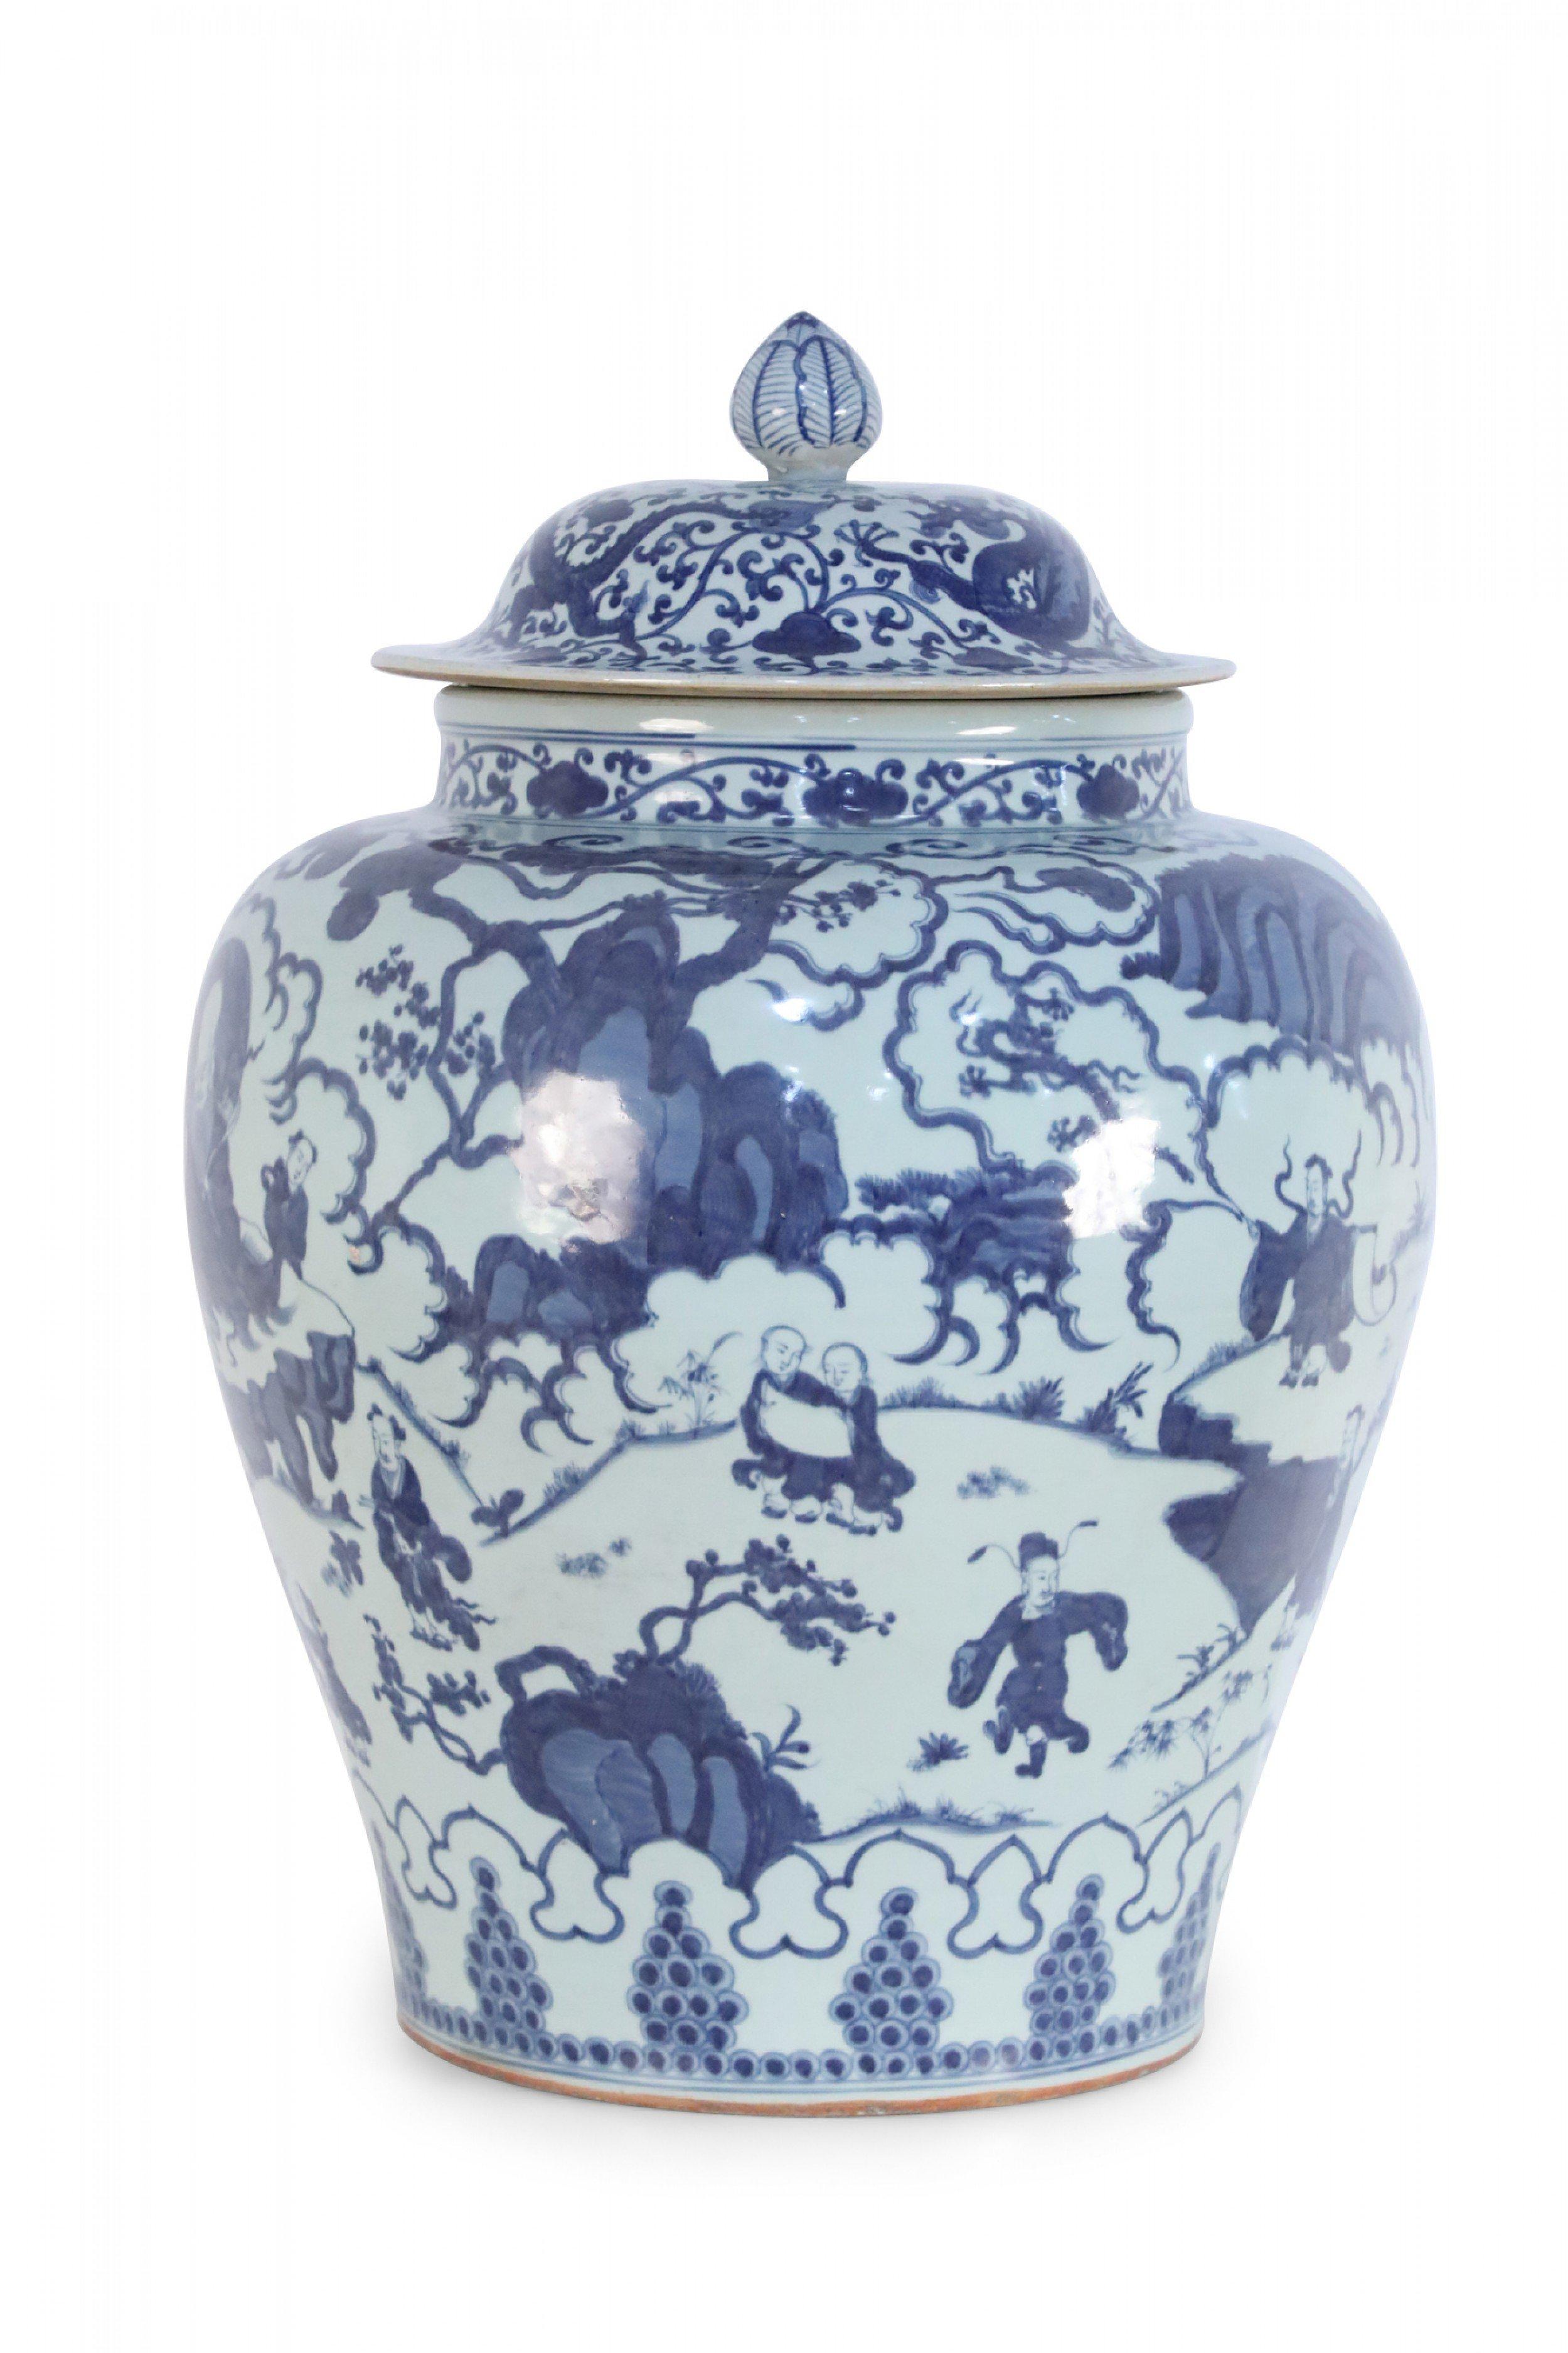 Chinese Export Chinese White and Blue Figurative Porcelain Ginger Jar